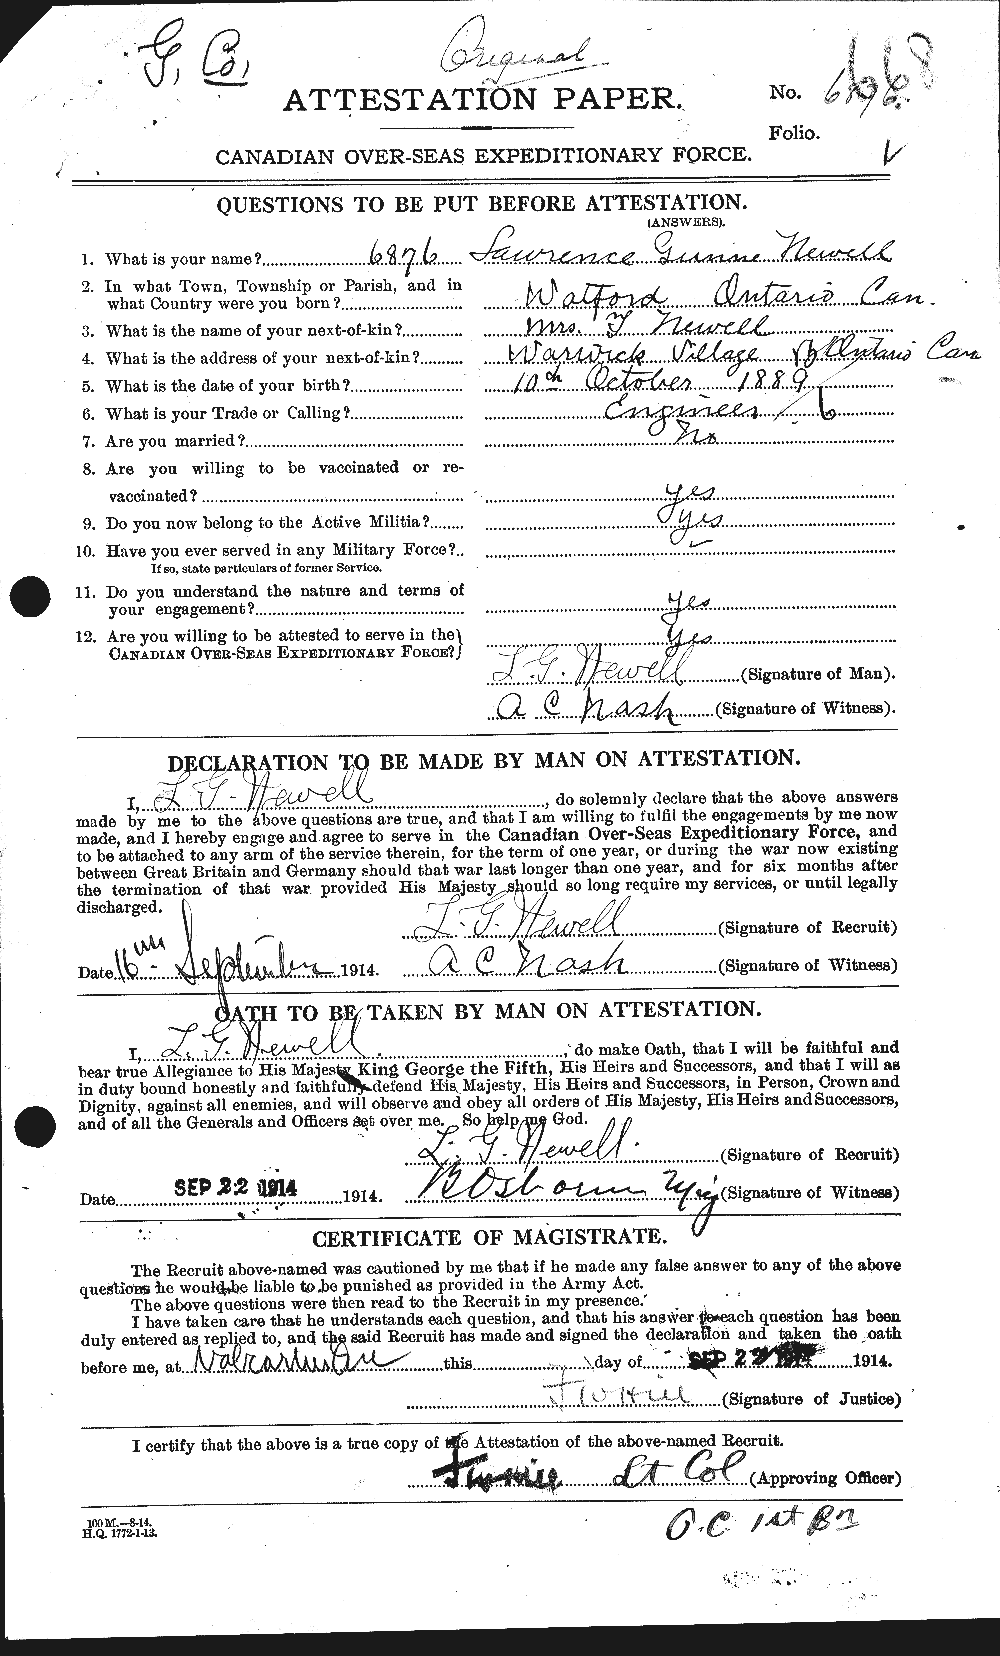 Personnel Records of the First World War - CEF 547840a